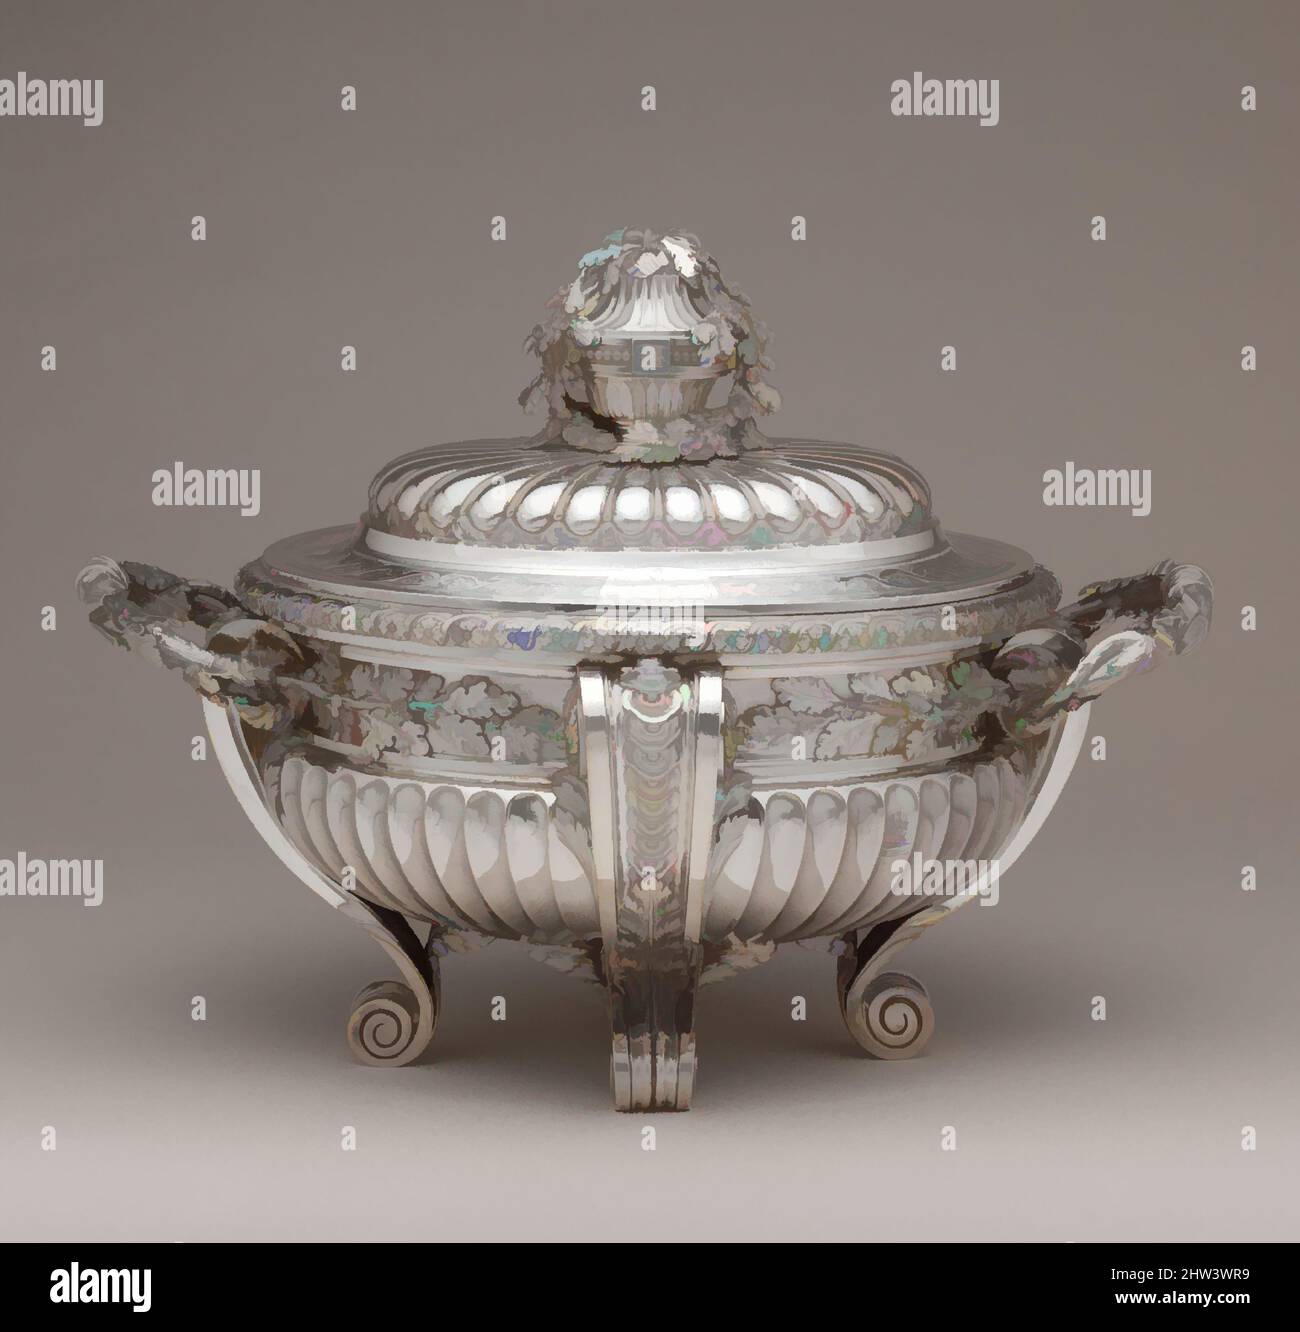 Art inspired by Tureen with cover, Jacques-Nicolas Roettiers (1736–1788, master 1765, retired 1777), 1775–76, French, Paris, Silver, Overall (wt. confirmed): 11 3/4 x 16 in., 16.8 lb. (29.8 x 40.6 cm, 7.64 kg), Metalwork-Silver, Jacques-Nicolas Roettiers (1736–1788, master 1765, Classic works modernized by Artotop with a splash of modernity. Shapes, color and value, eye-catching visual impact on art. Emotions through freedom of artworks in a contemporary way. A timeless message pursuing a wildly creative new direction. Artists turning to the digital medium and creating the Artotop NFT Stock Photo